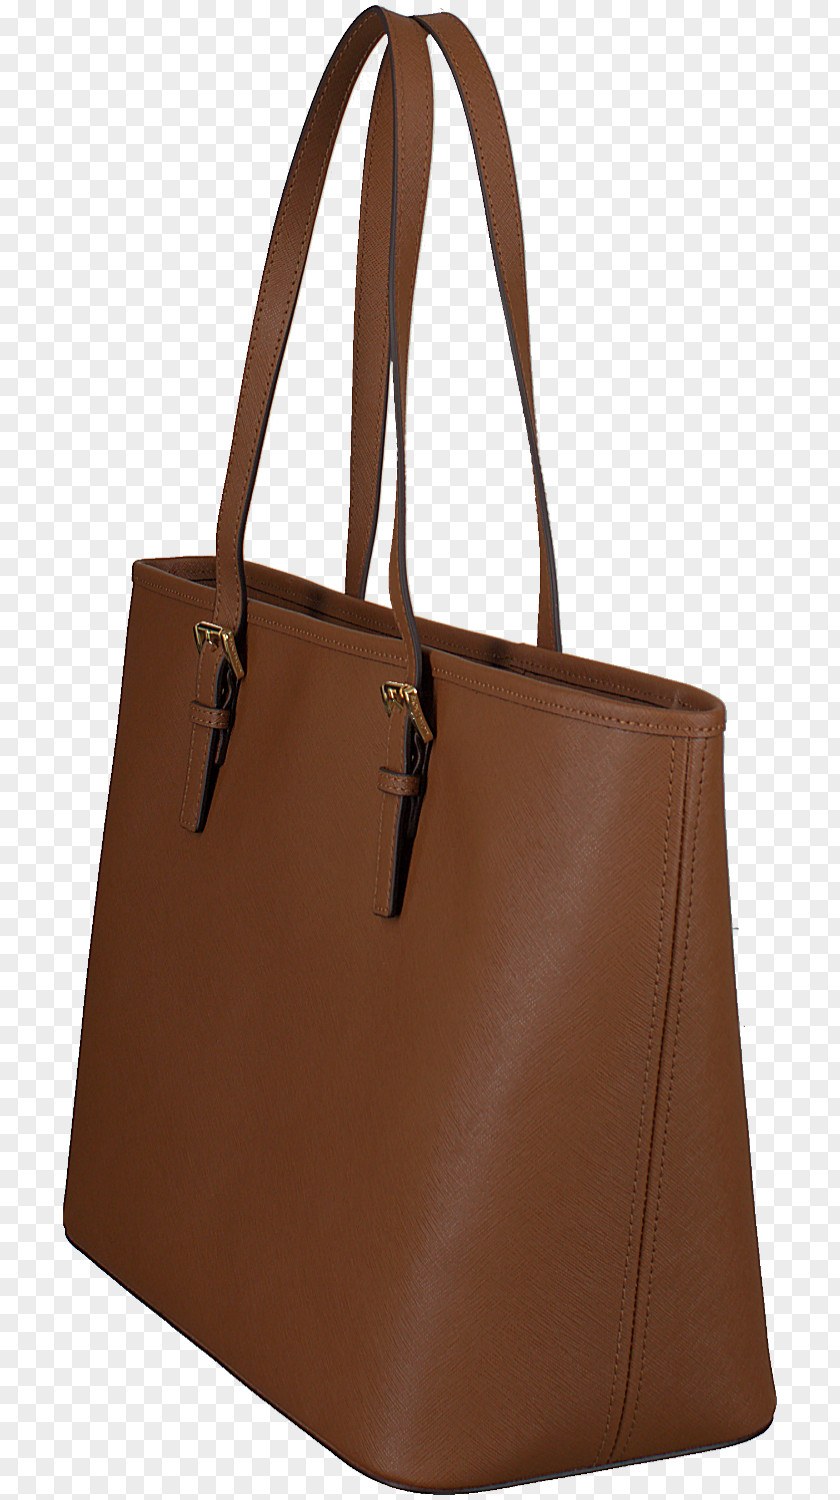 Women Bag Handbag Tote Clothing Accessories Leather PNG